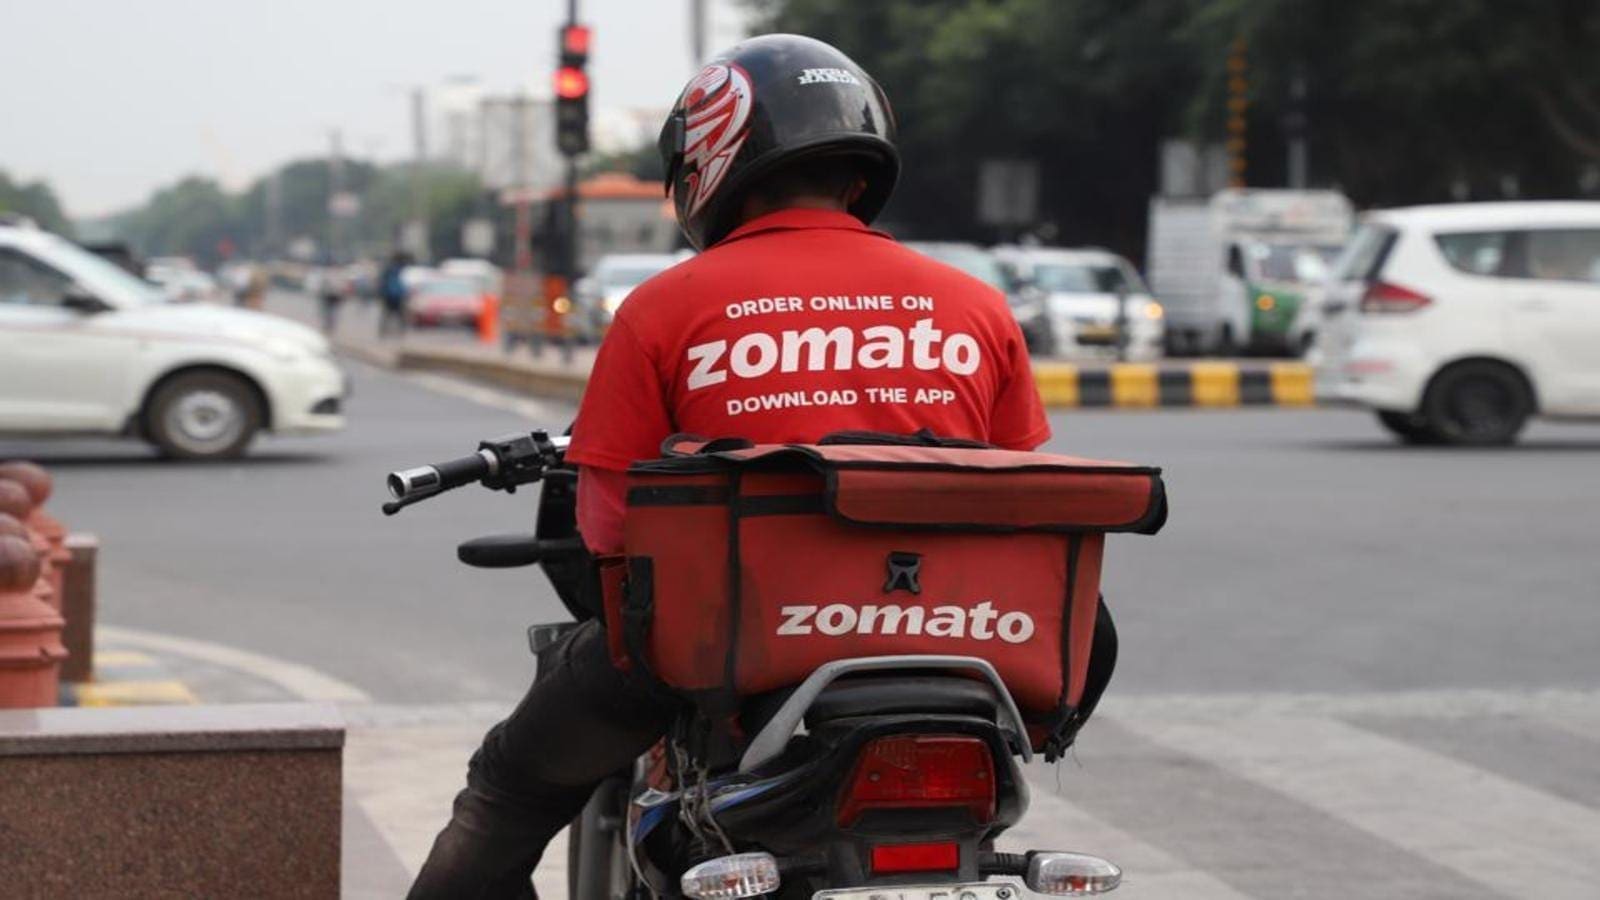 Zomato positive about growth despite losses tripling to US$46m in Q4